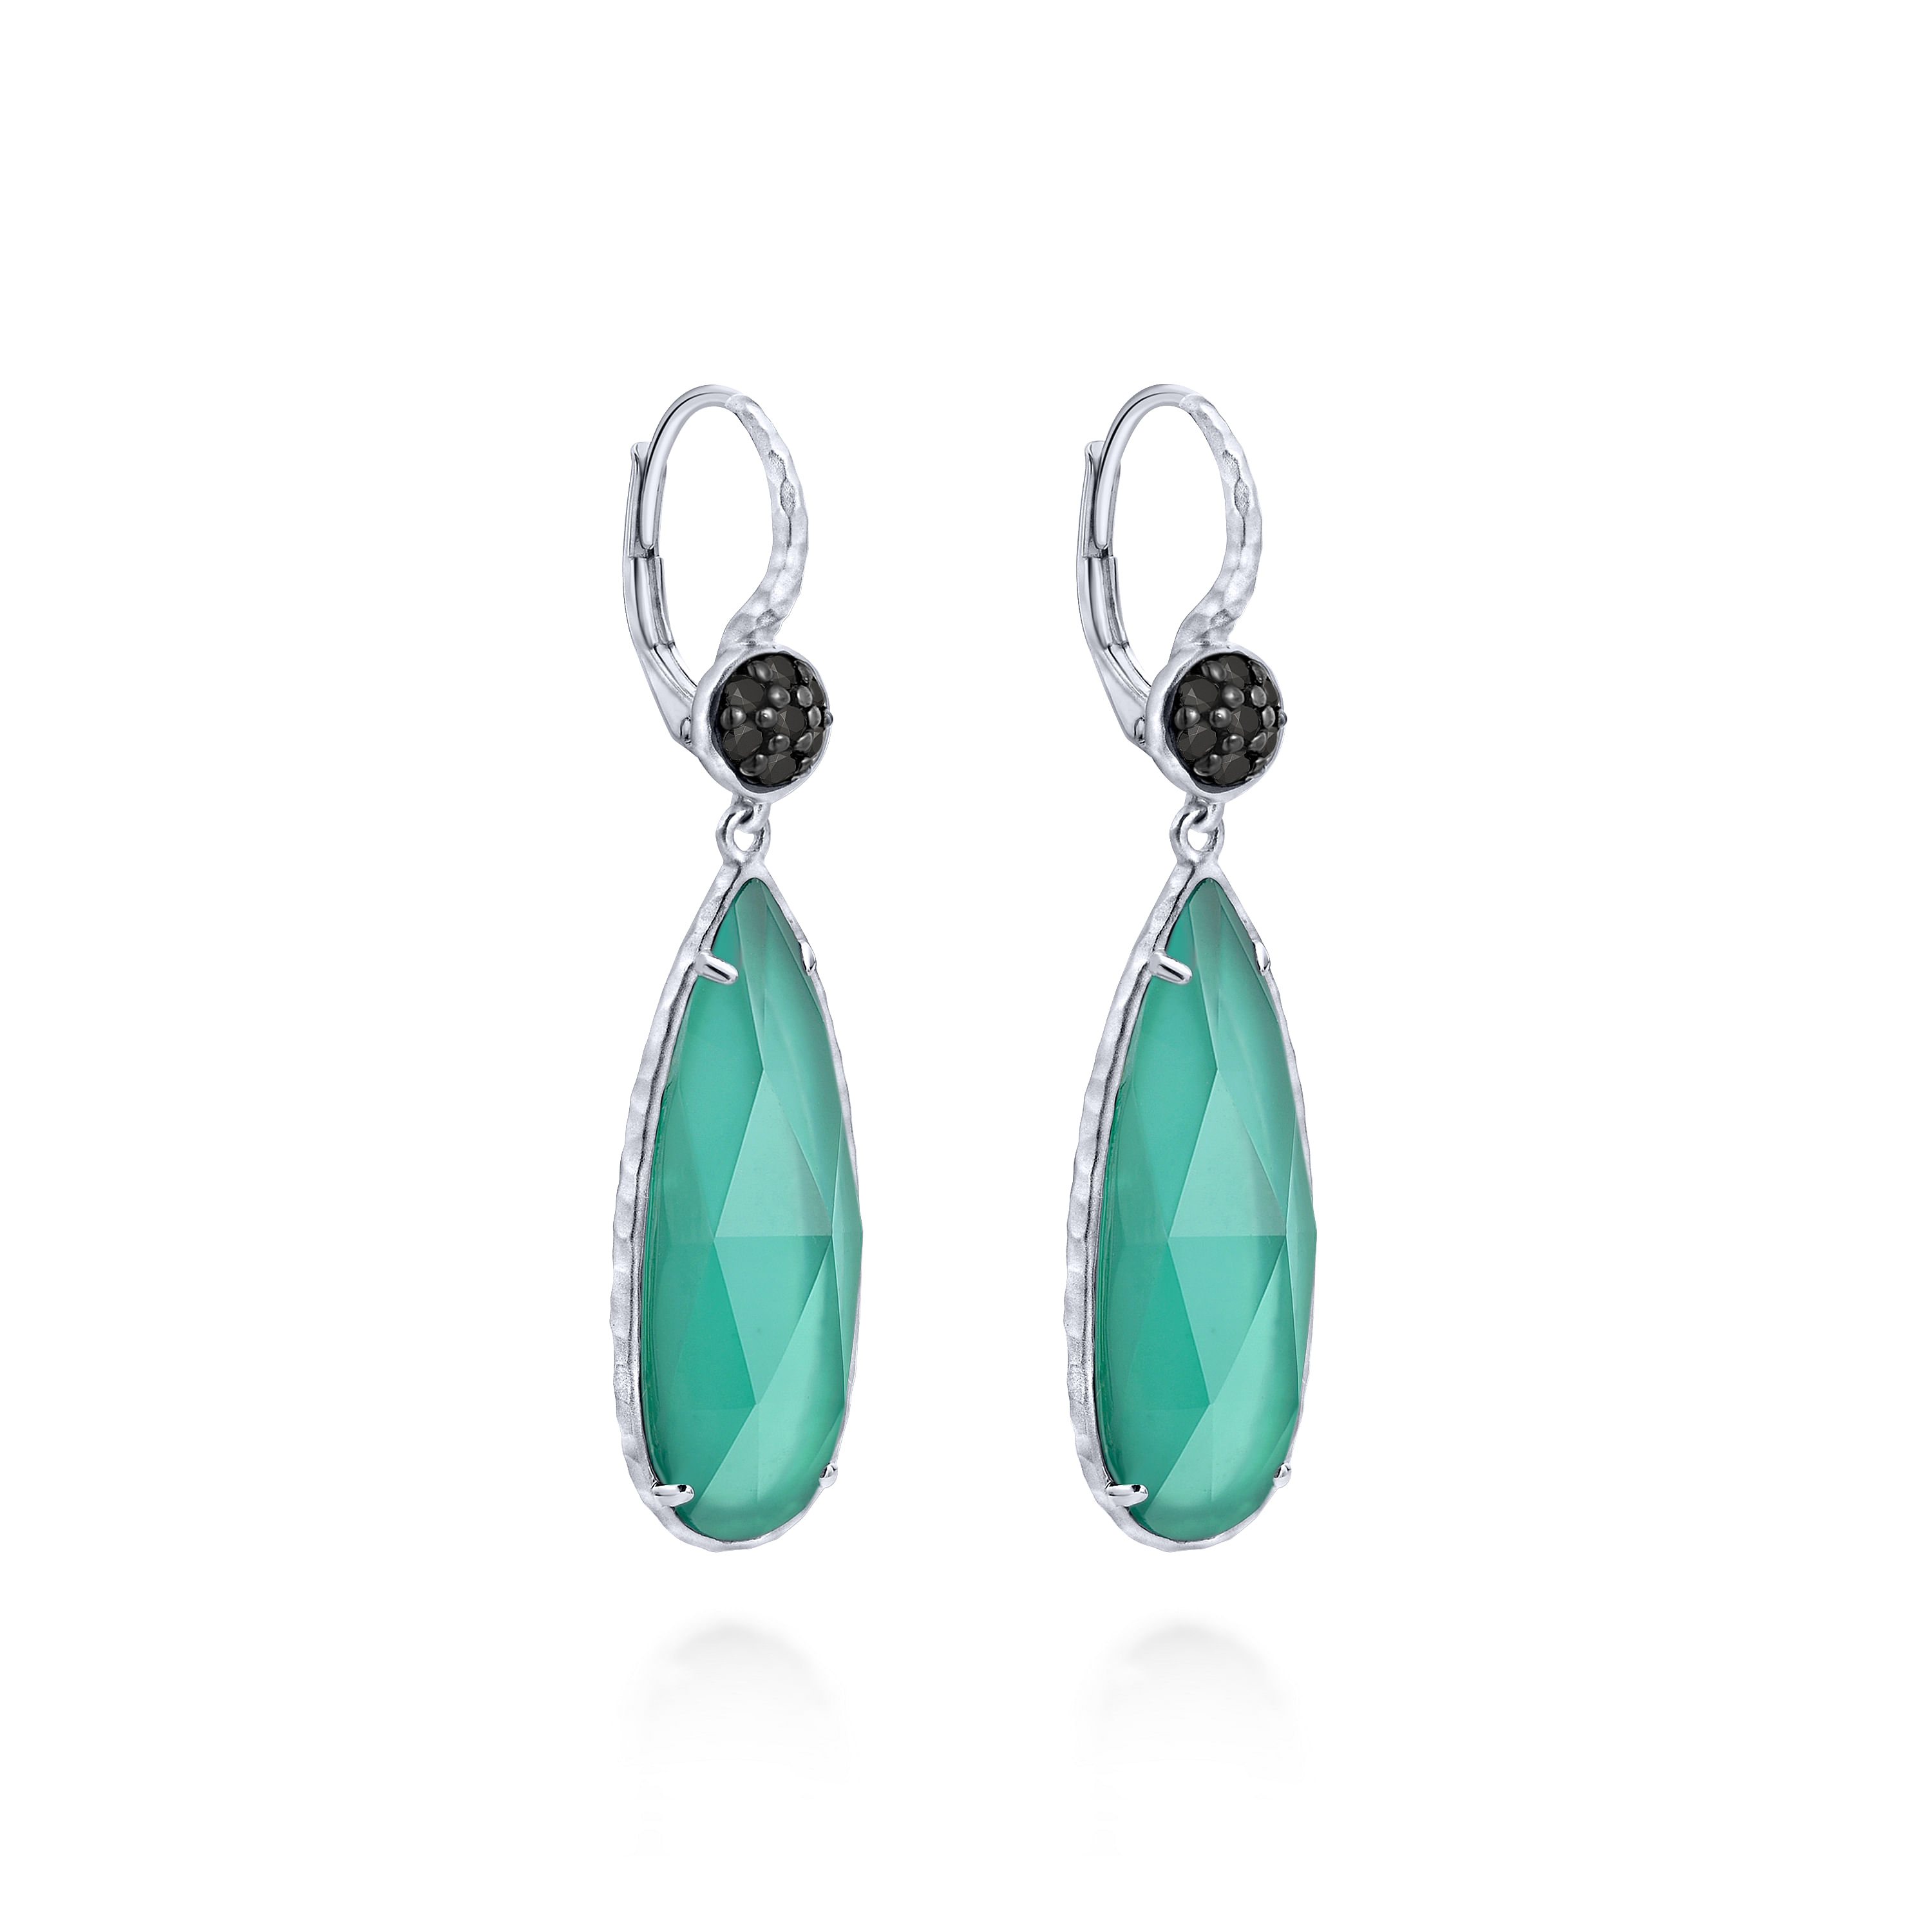 Sterling Silver Long Rock Crystal/Green Onyx Drop Earrings with Black Spinel Tops